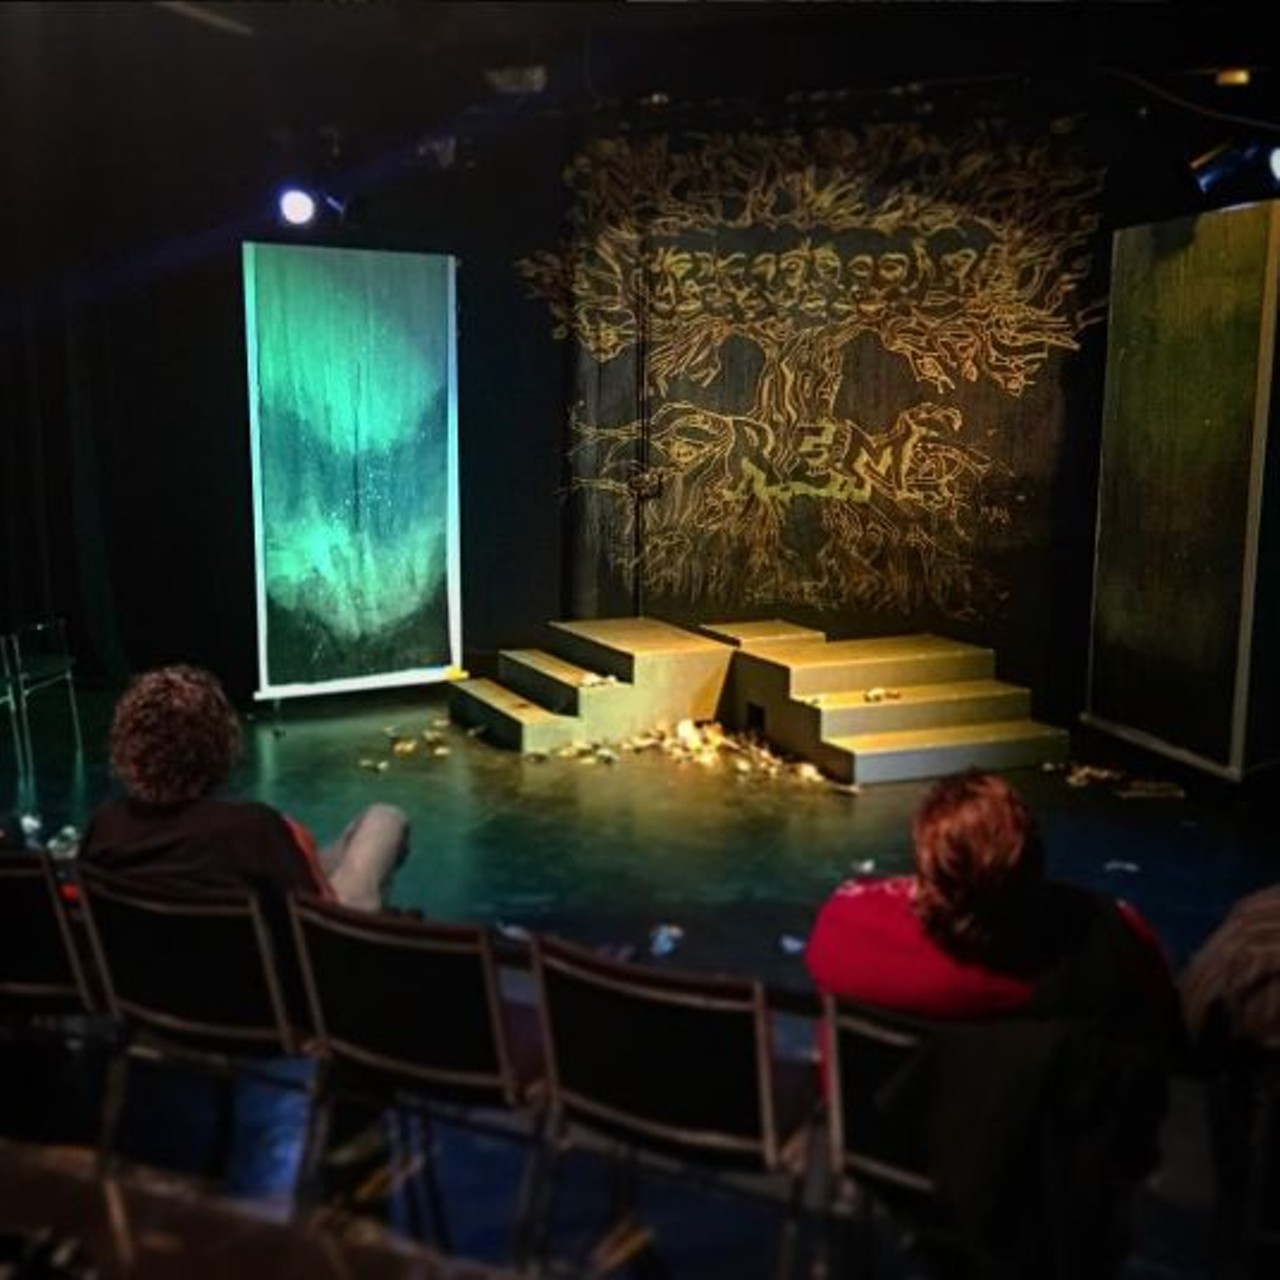 Jump&#150;Start Performance Company 
710 Fredericksburg Road, (210) 227-5867 
Don&#146;t forget your bottle of wine when you check out a performance at this theater.
Photo via Instagram, lrdietrich